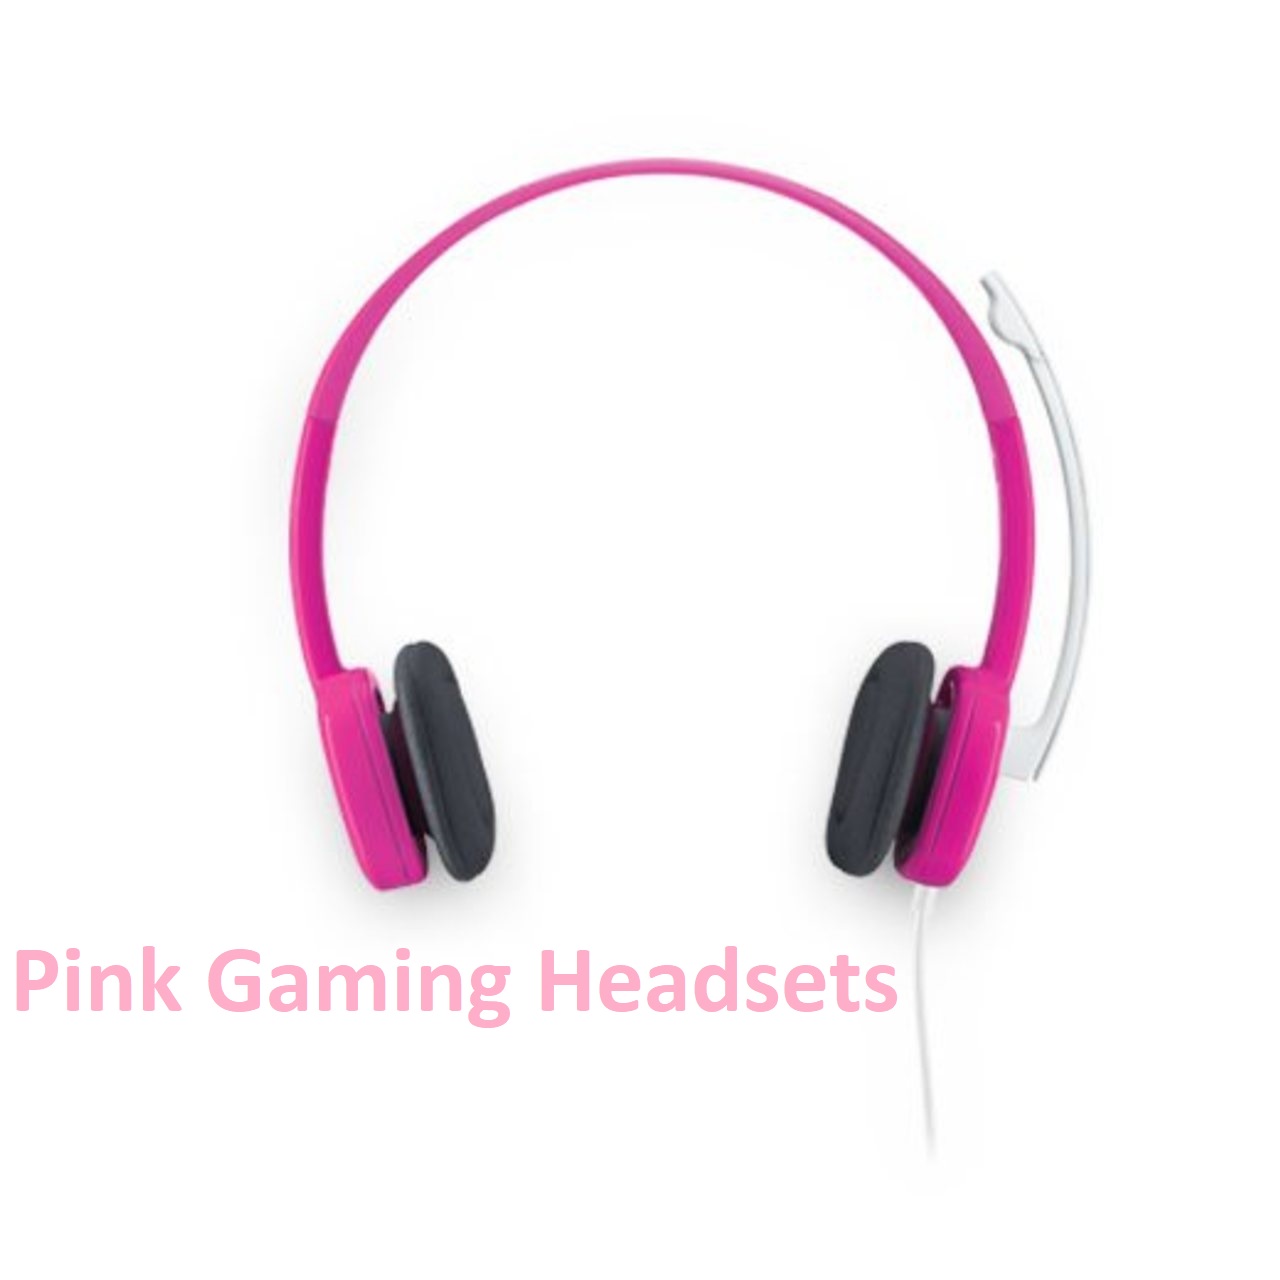 Pink Gaming Headsets